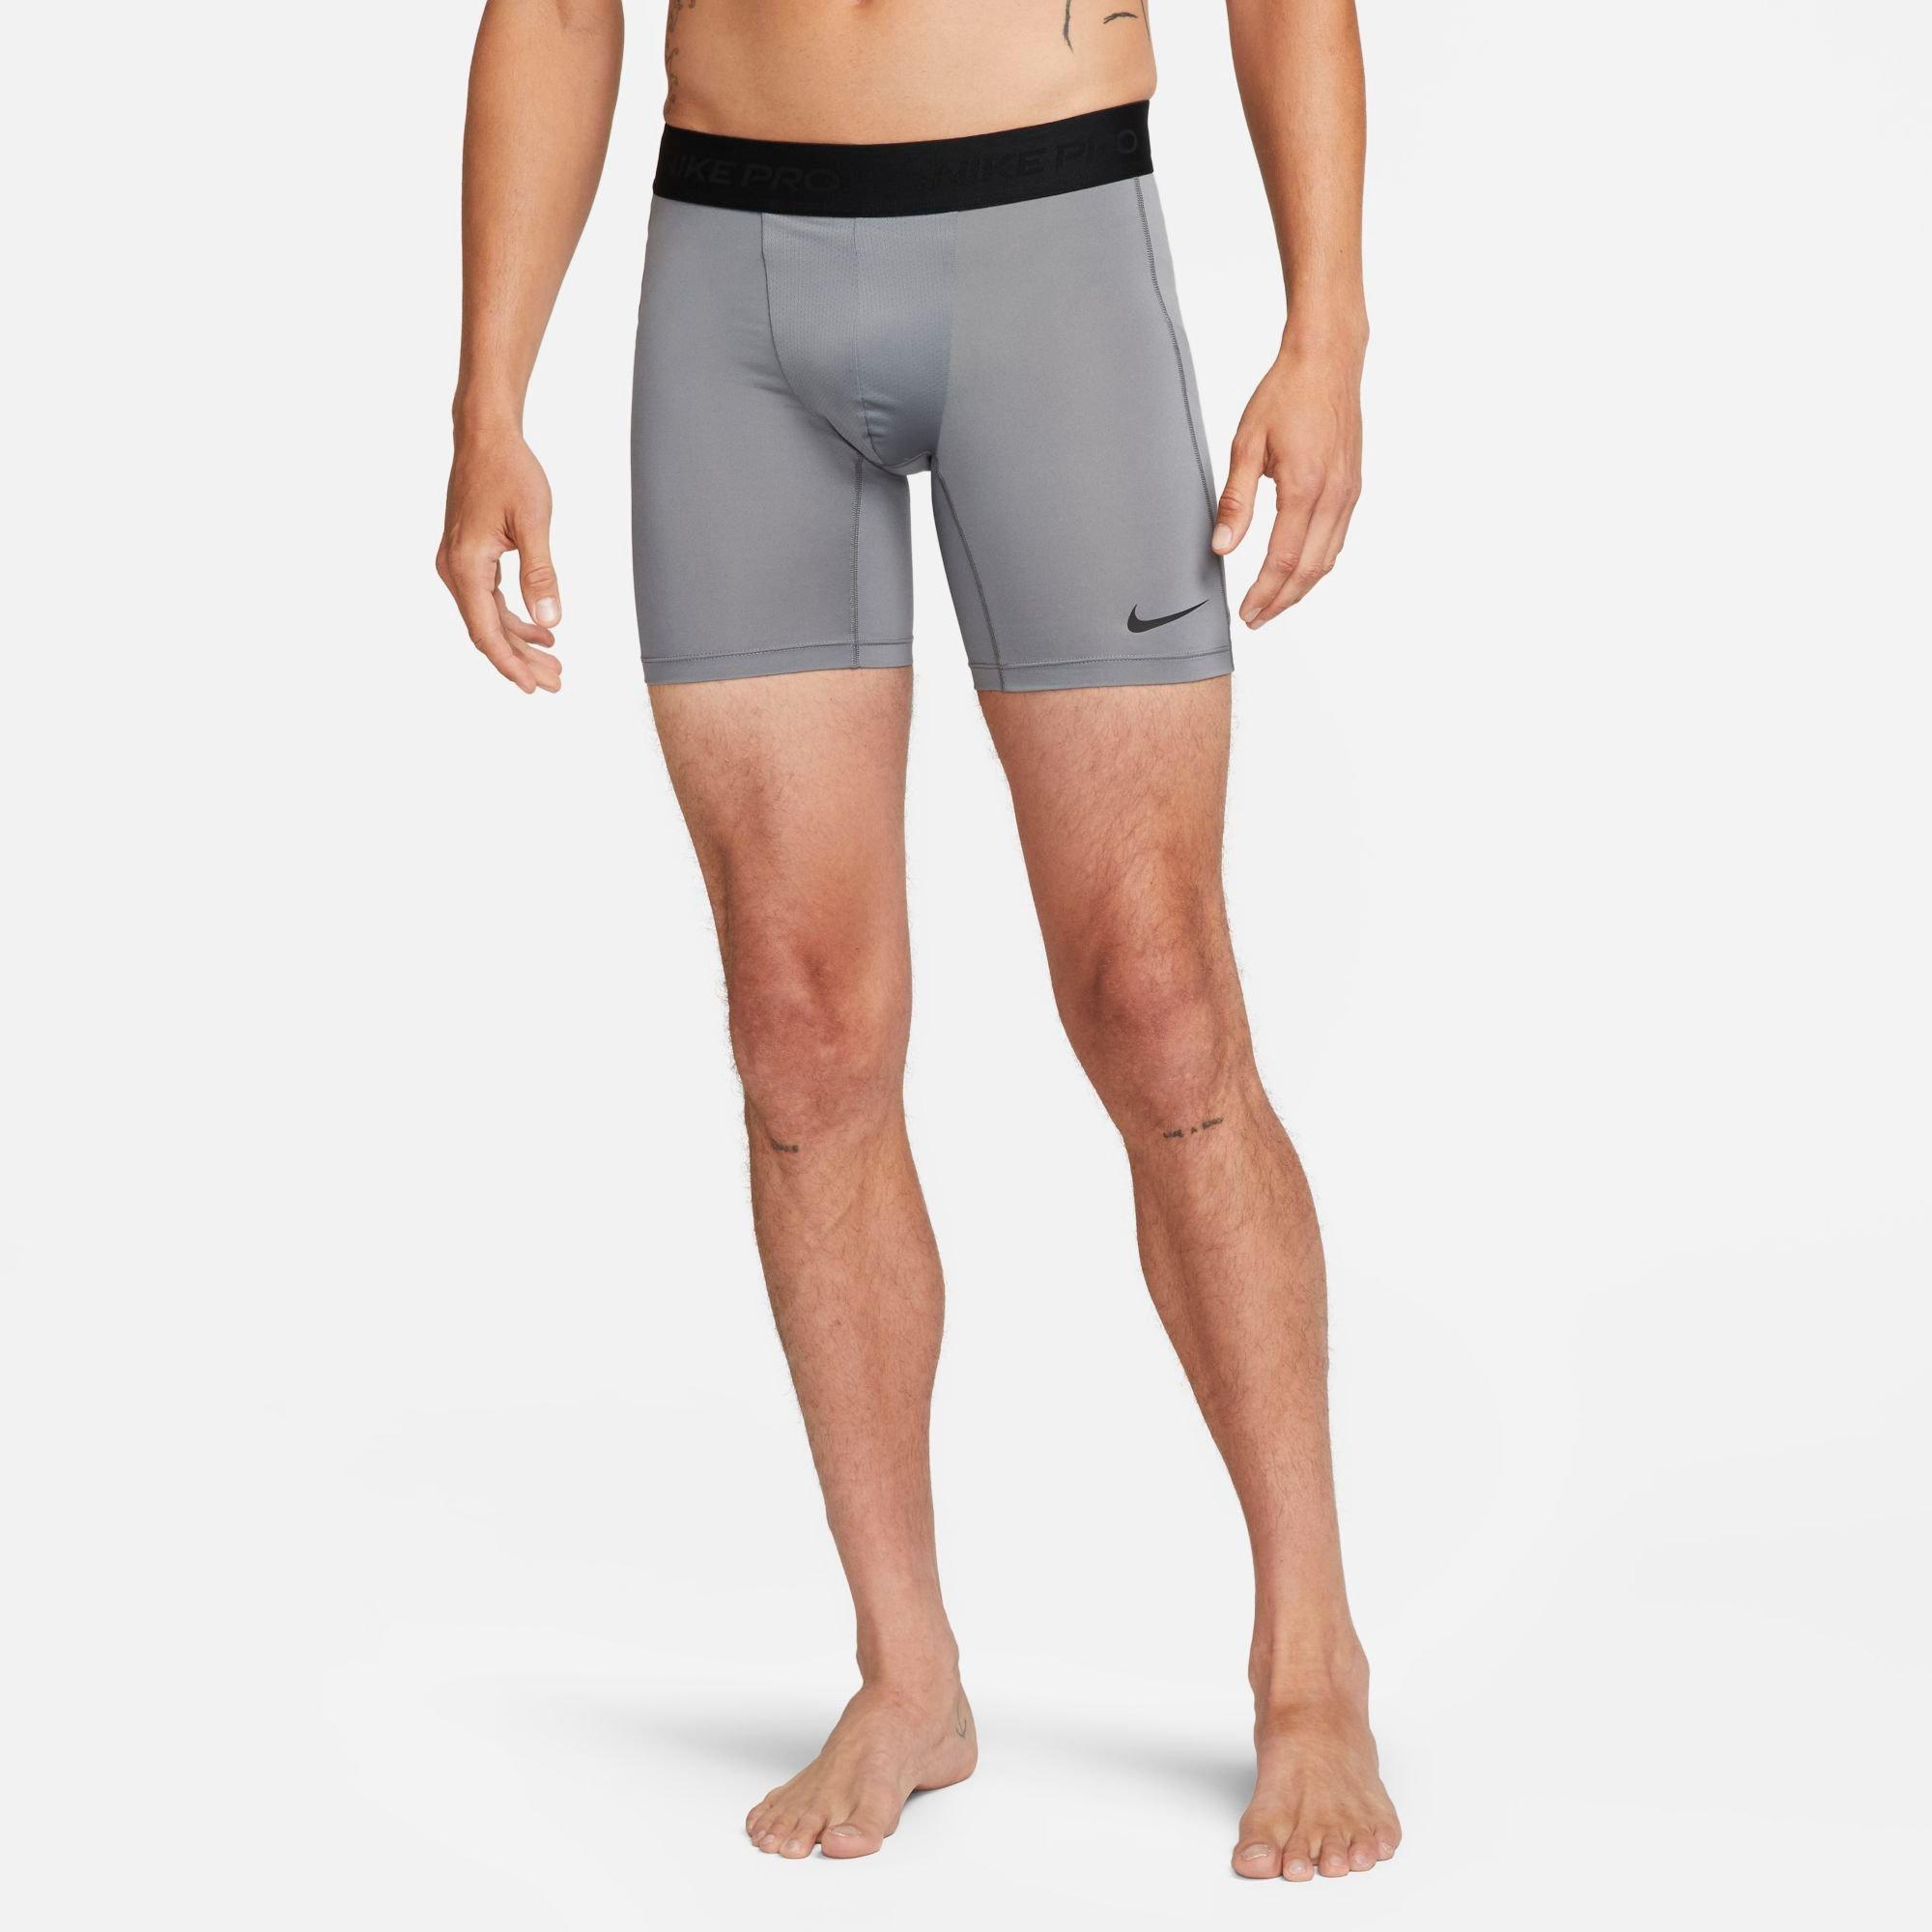 Nike Pro Training boxer briefs in grey